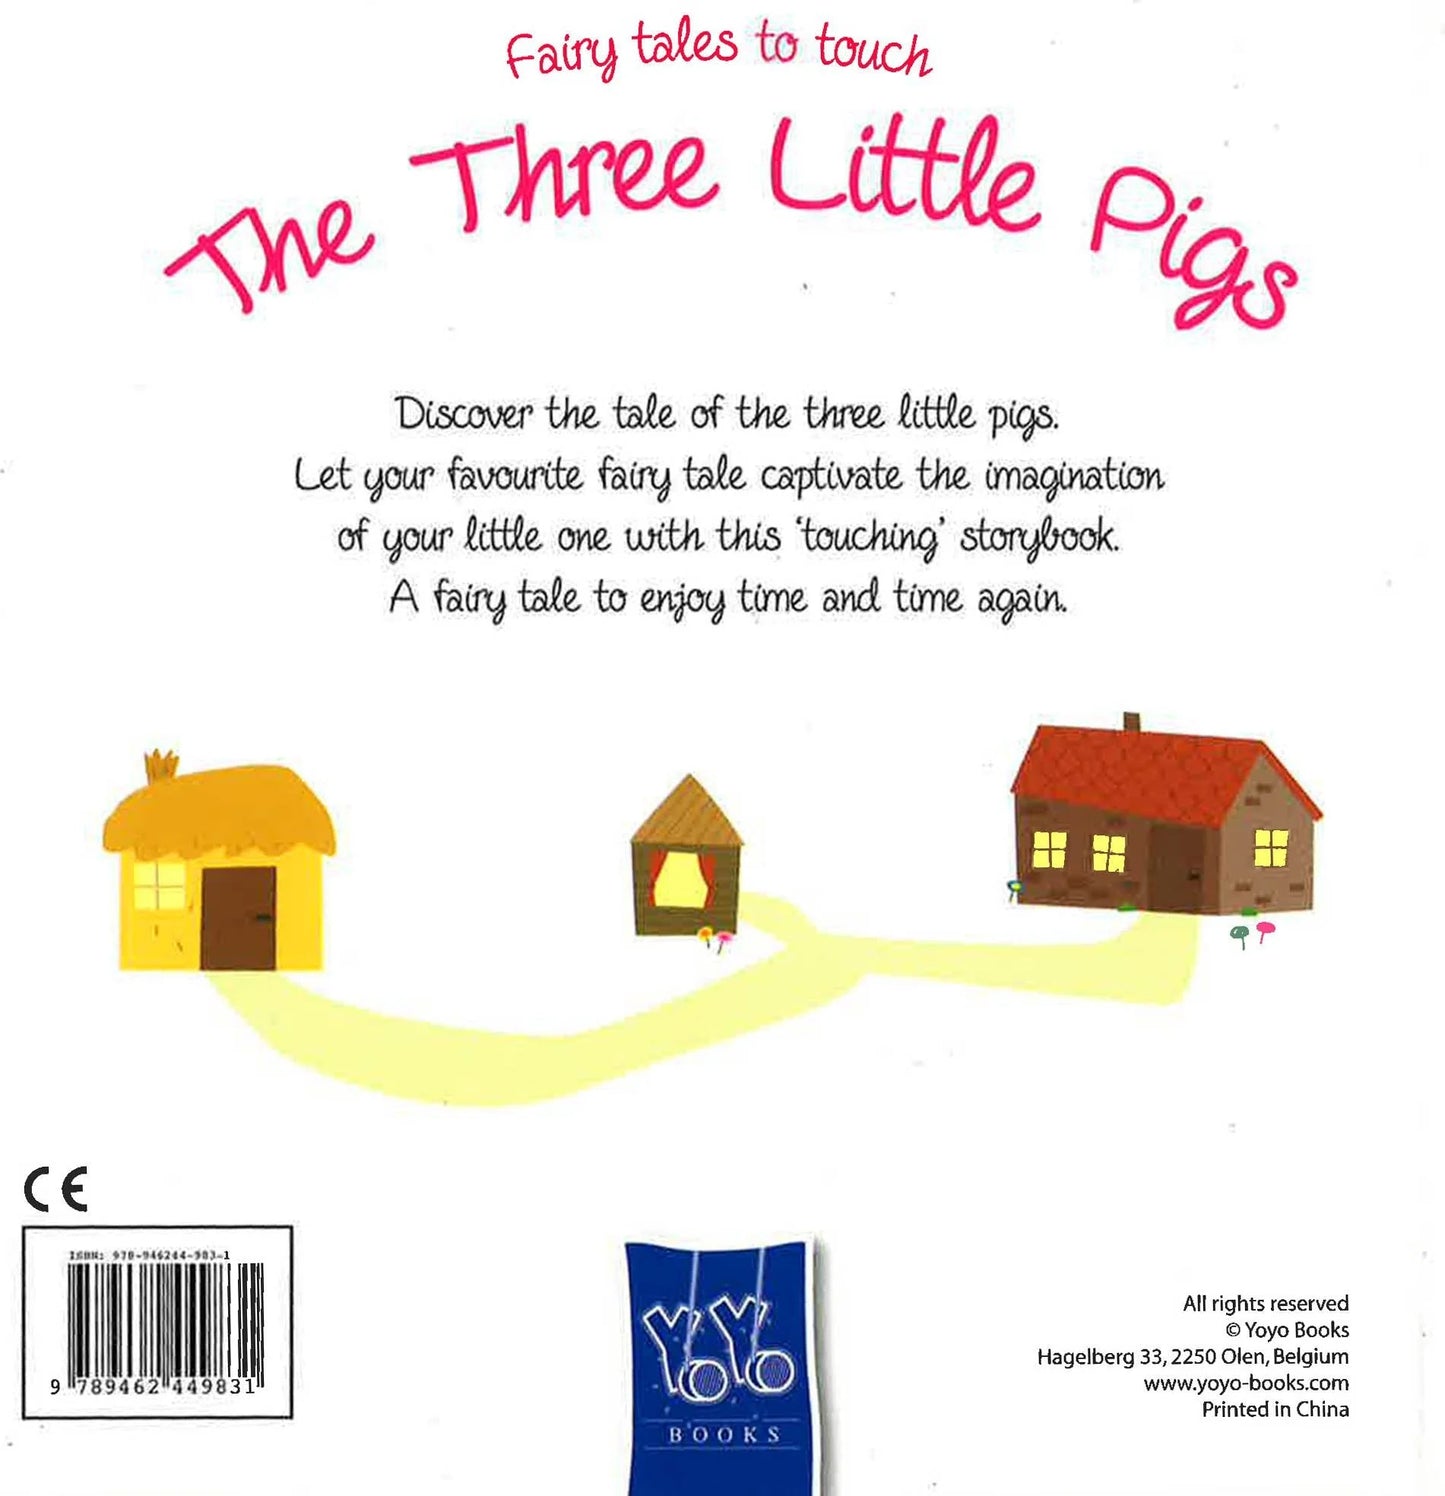 Fairy Tales to Touch: The Three Little Pigs - Board Book